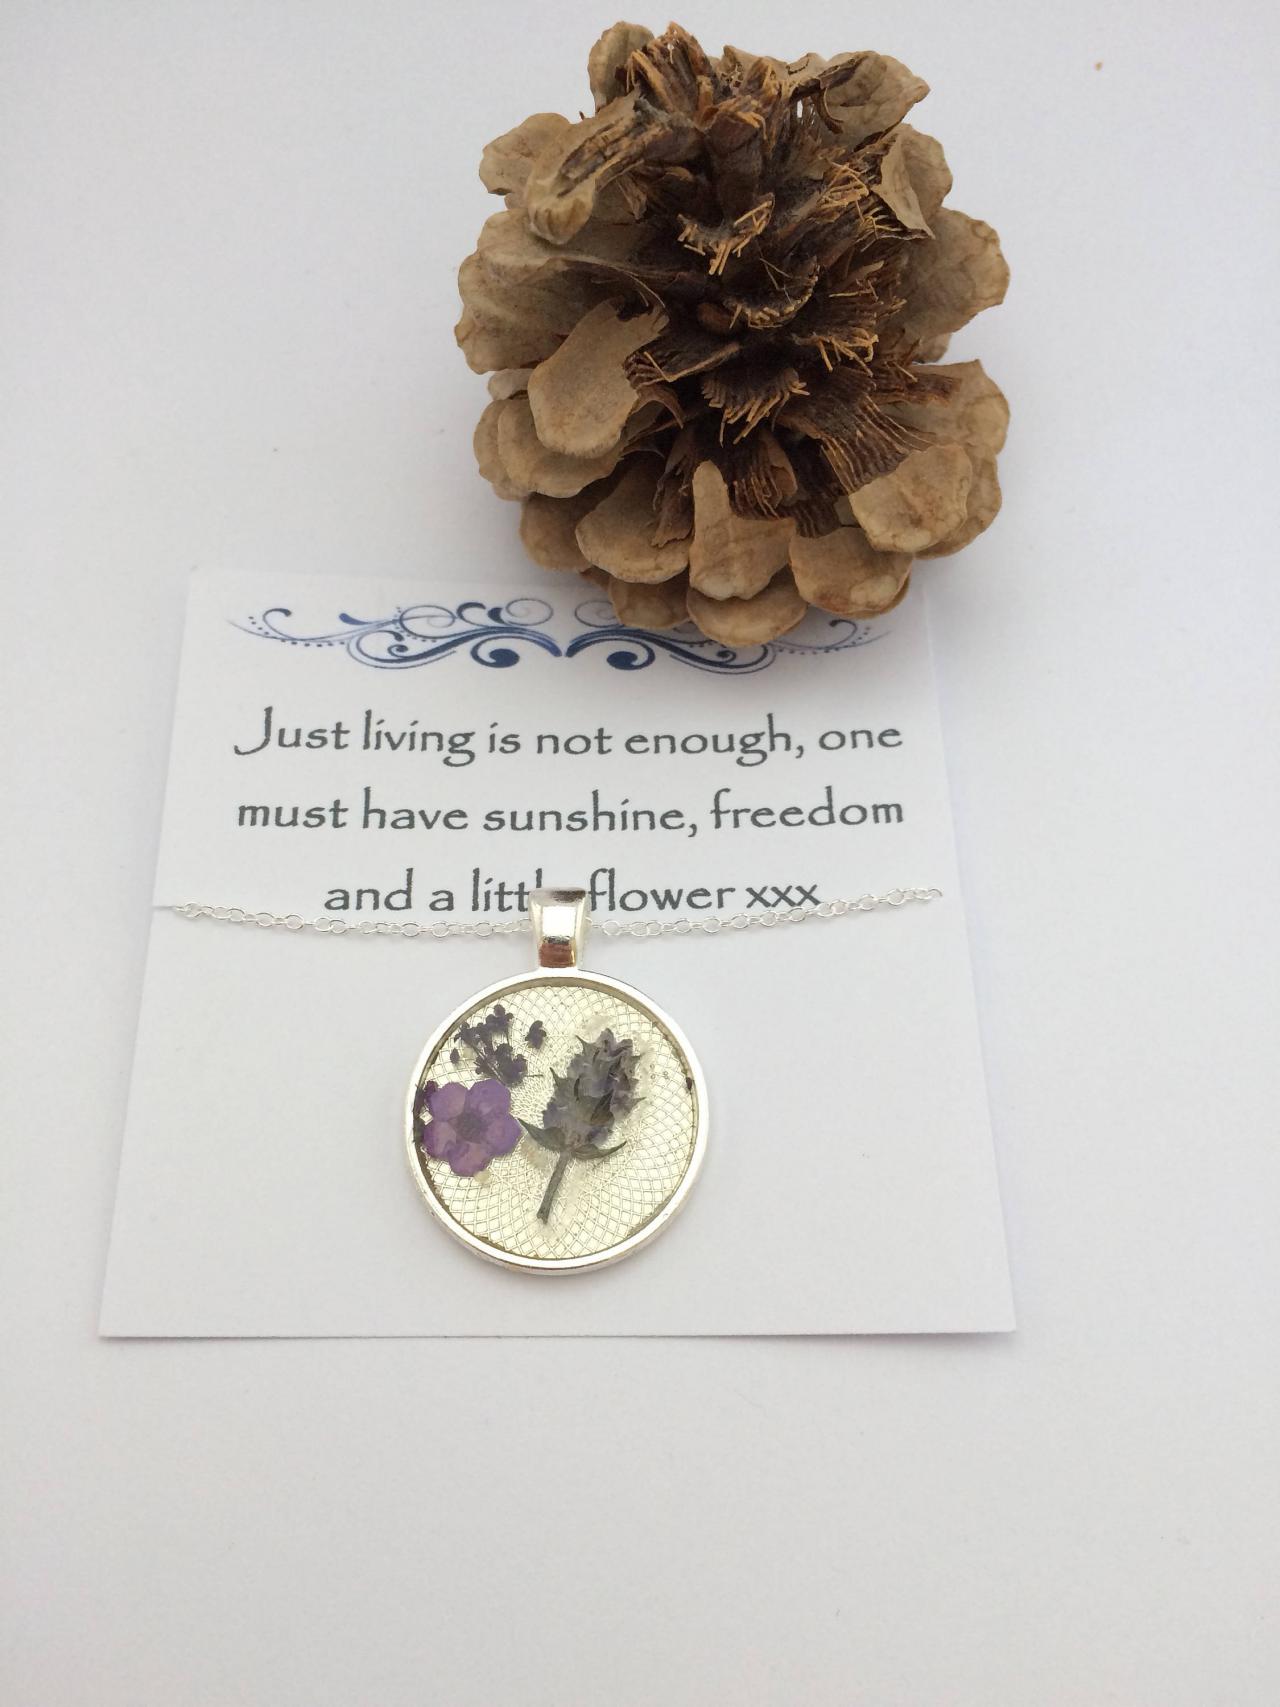 Memories Of Flowers - A Dried Flower Memory Necklace With A Beautiful Message